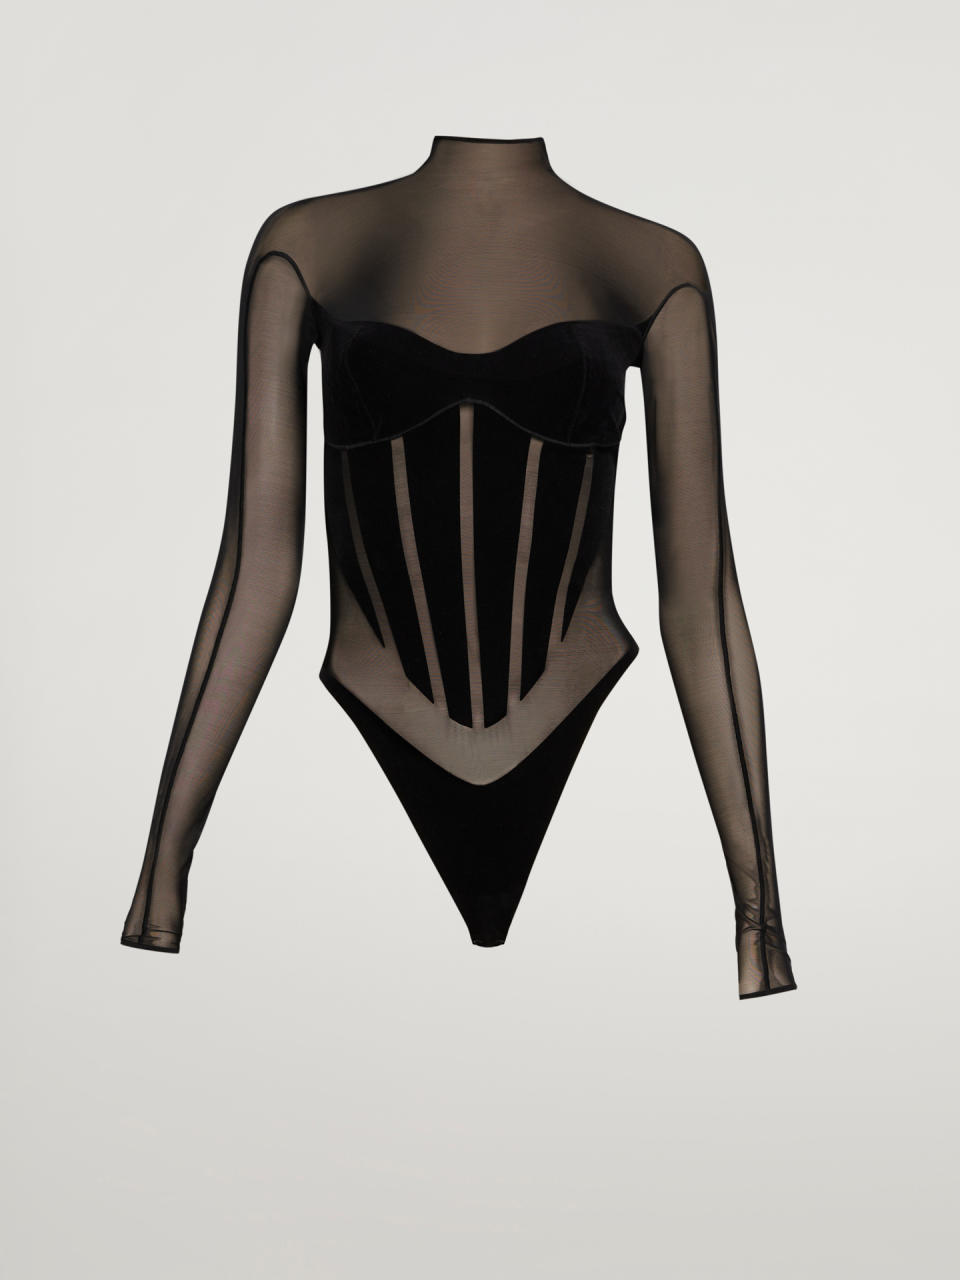 A look from the Mugler and Wolford capsule.